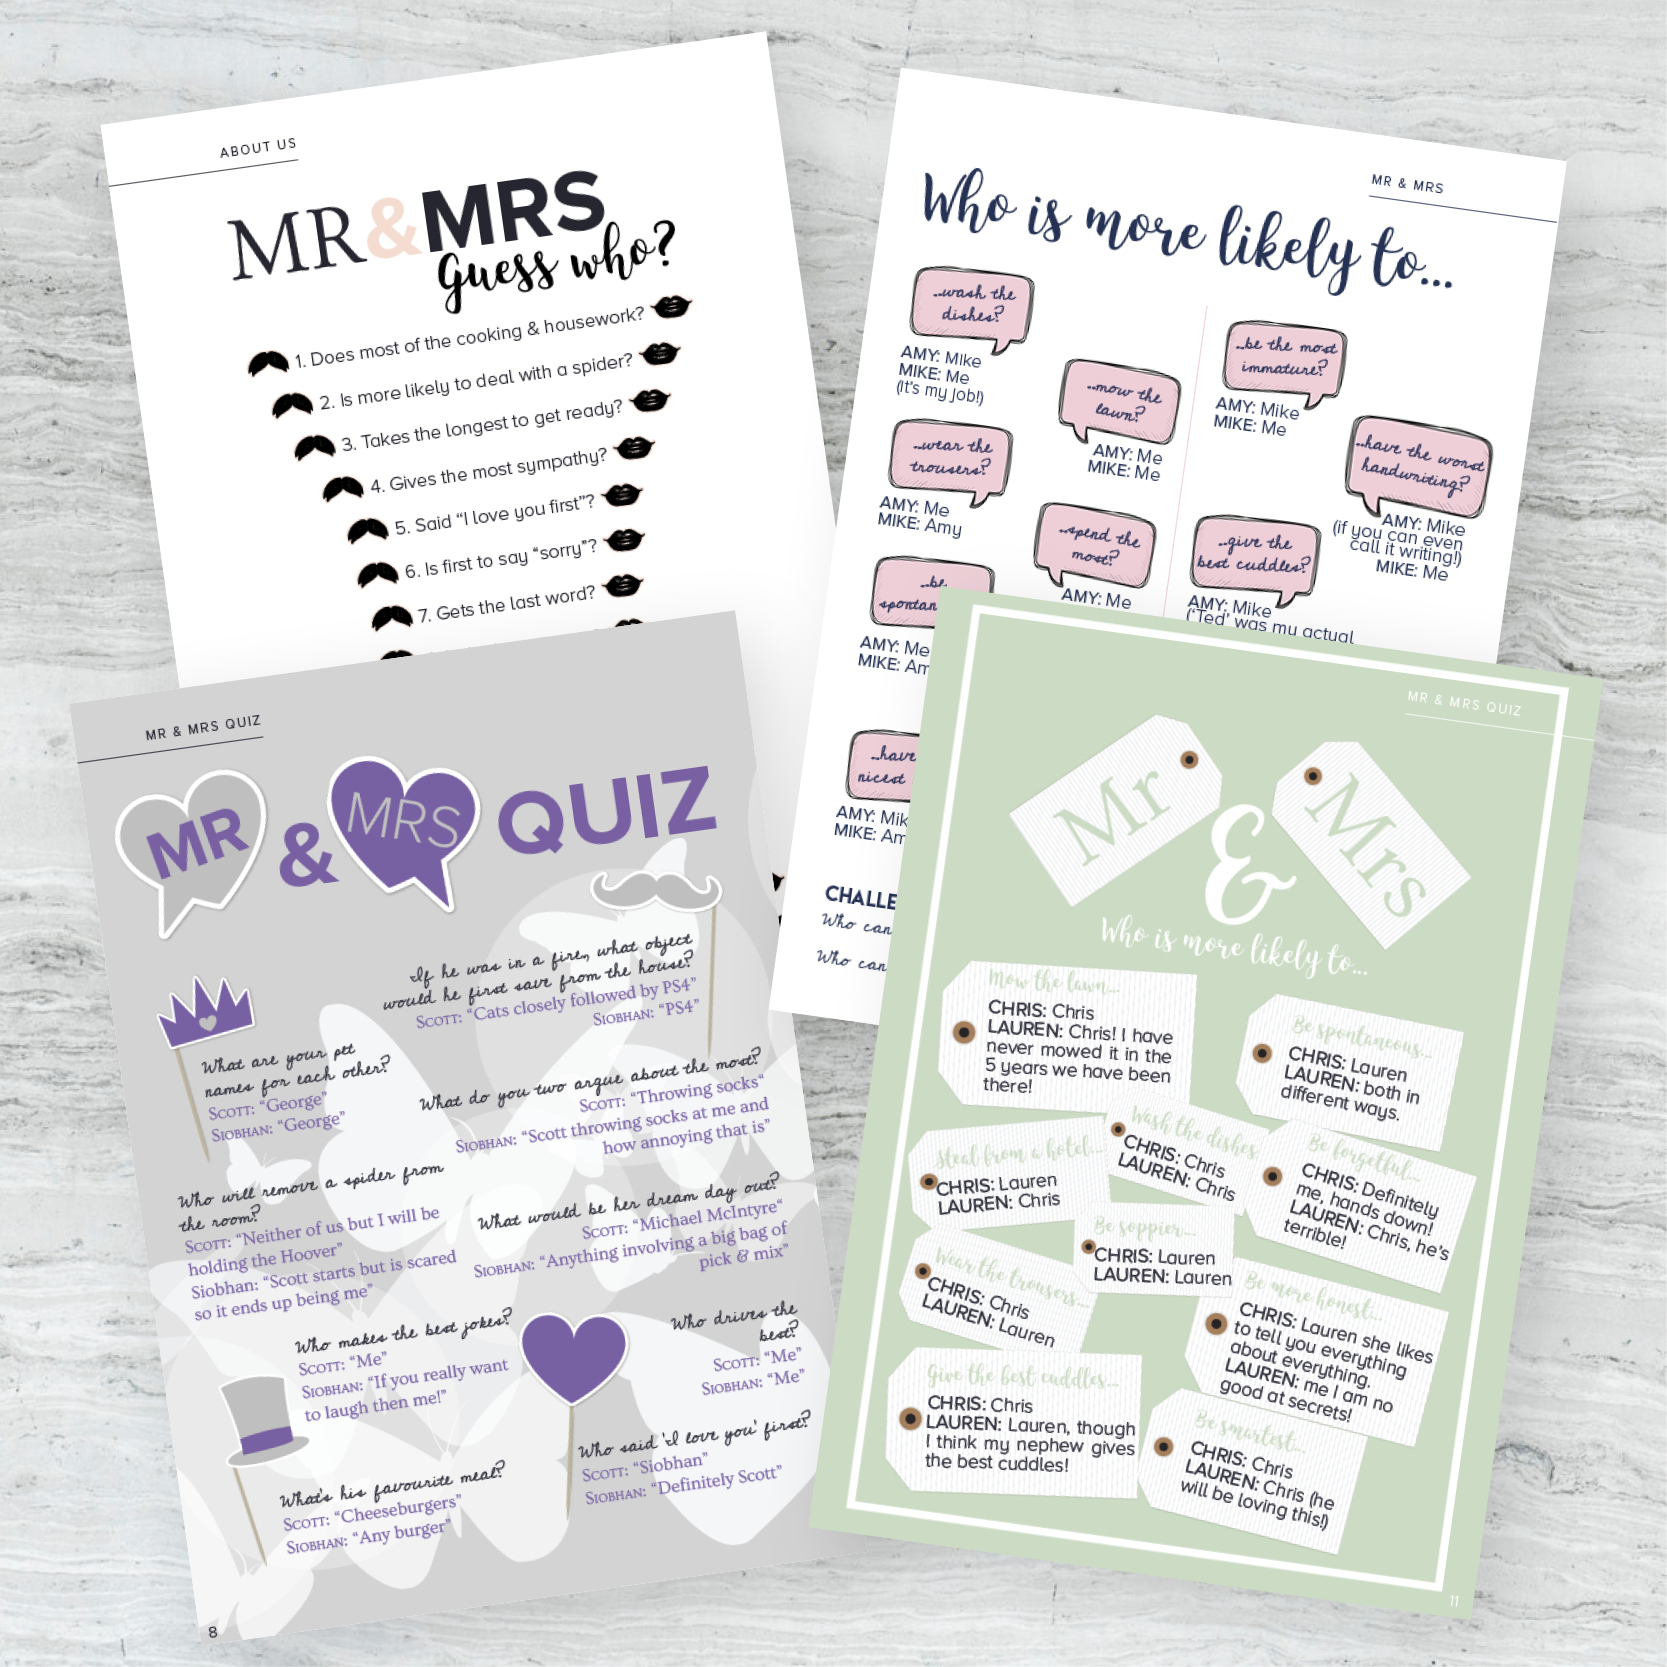 Mr and Mrs quiz examples, Mr and Mrs quiz example questions